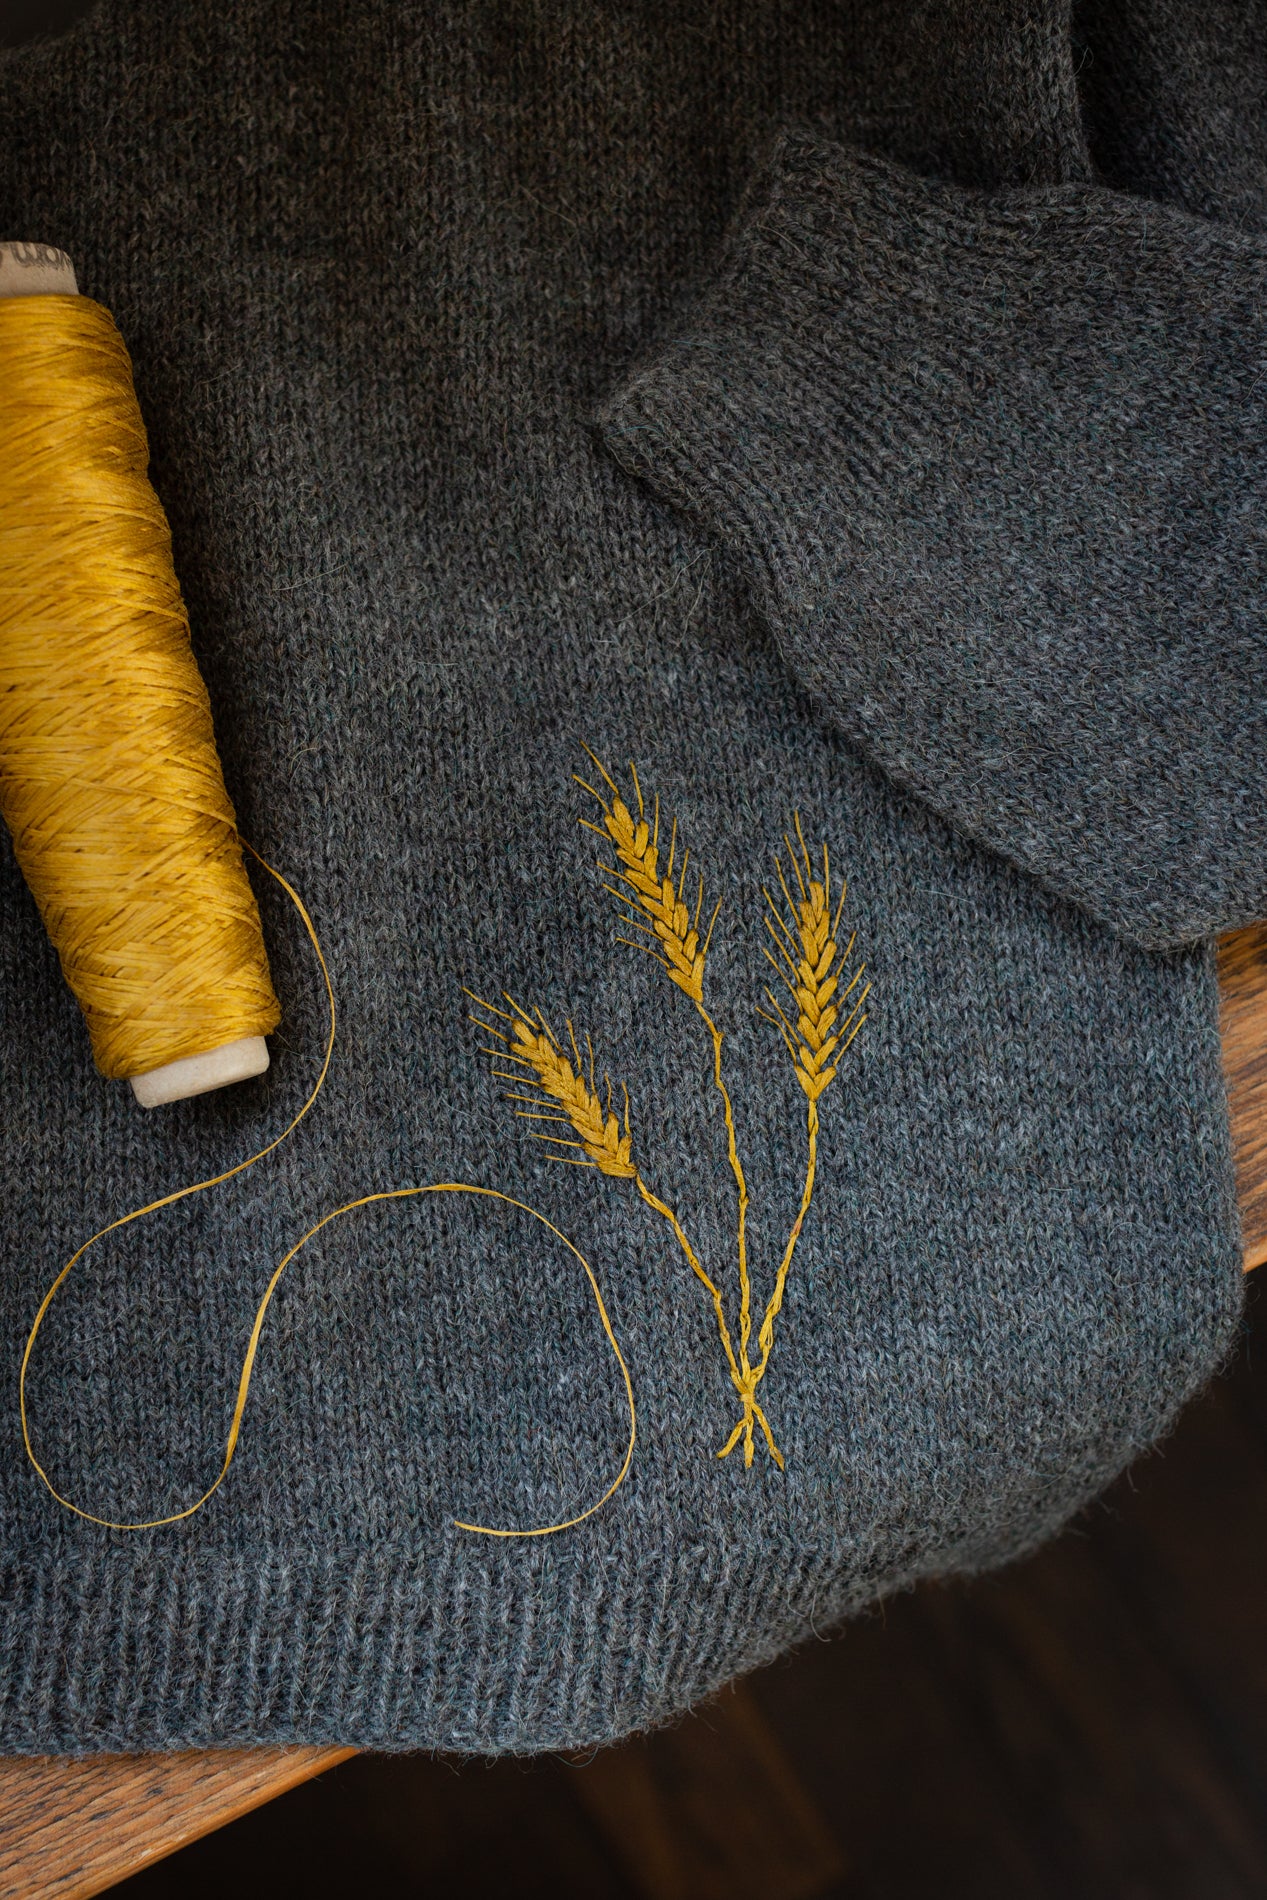 Embroidery on Knits by Judit Gummlich